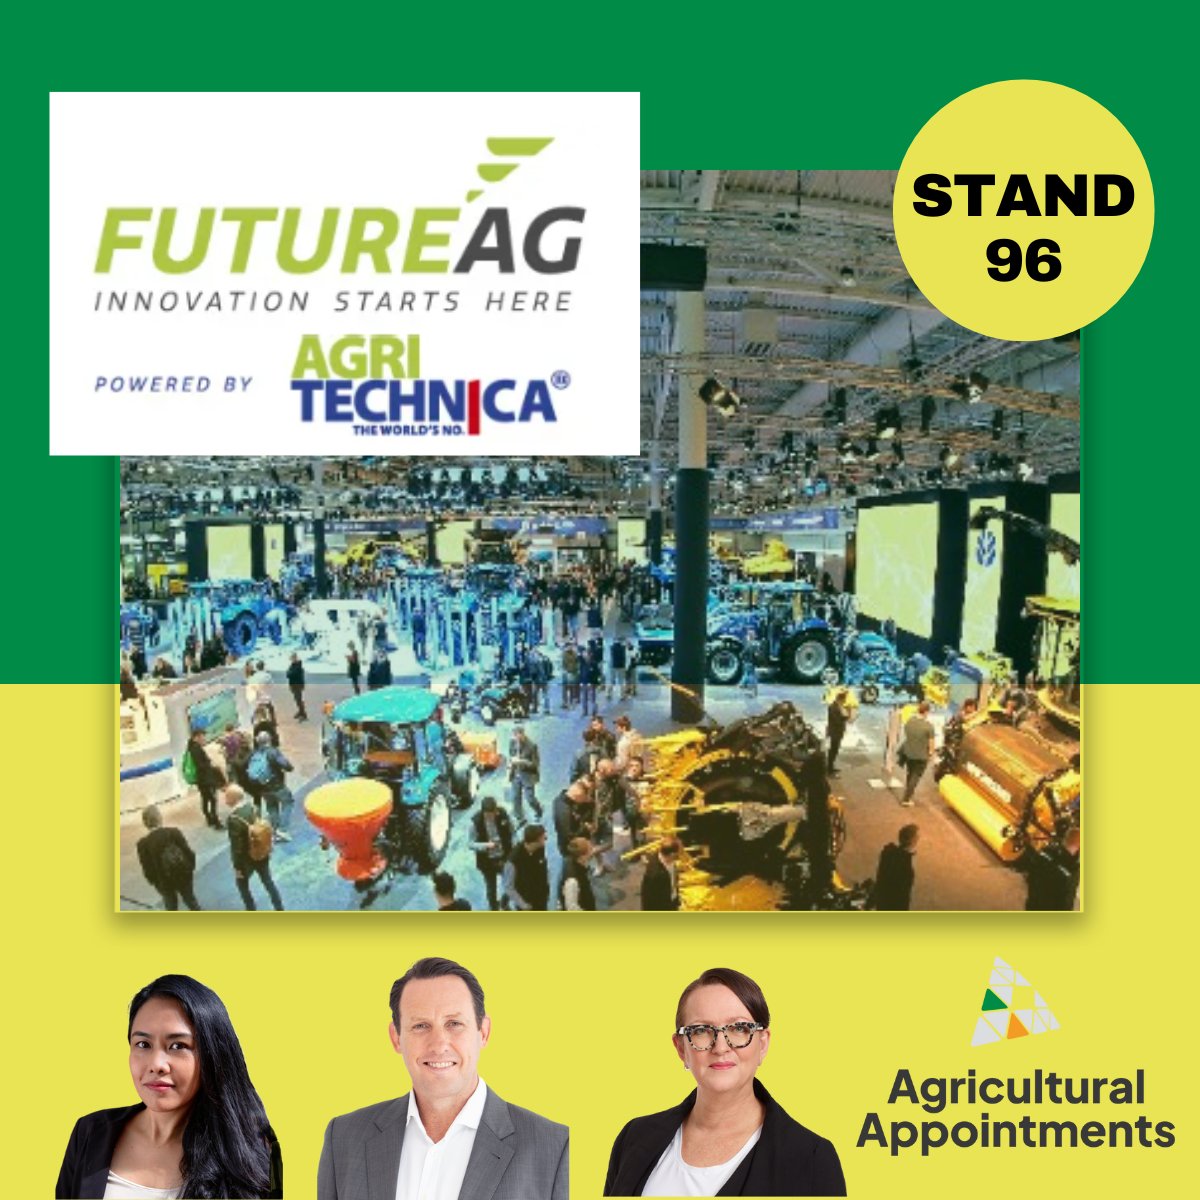 Come and talk to Pla, Peter and Elizabeth at Stand 96 about talent acquisition or career opportunities! FutureAg Expo, 17-19 April - Melbourne Showgrounds. #agjobs #seek #agchatoz #agriculture #farming #agribusiness #futureag